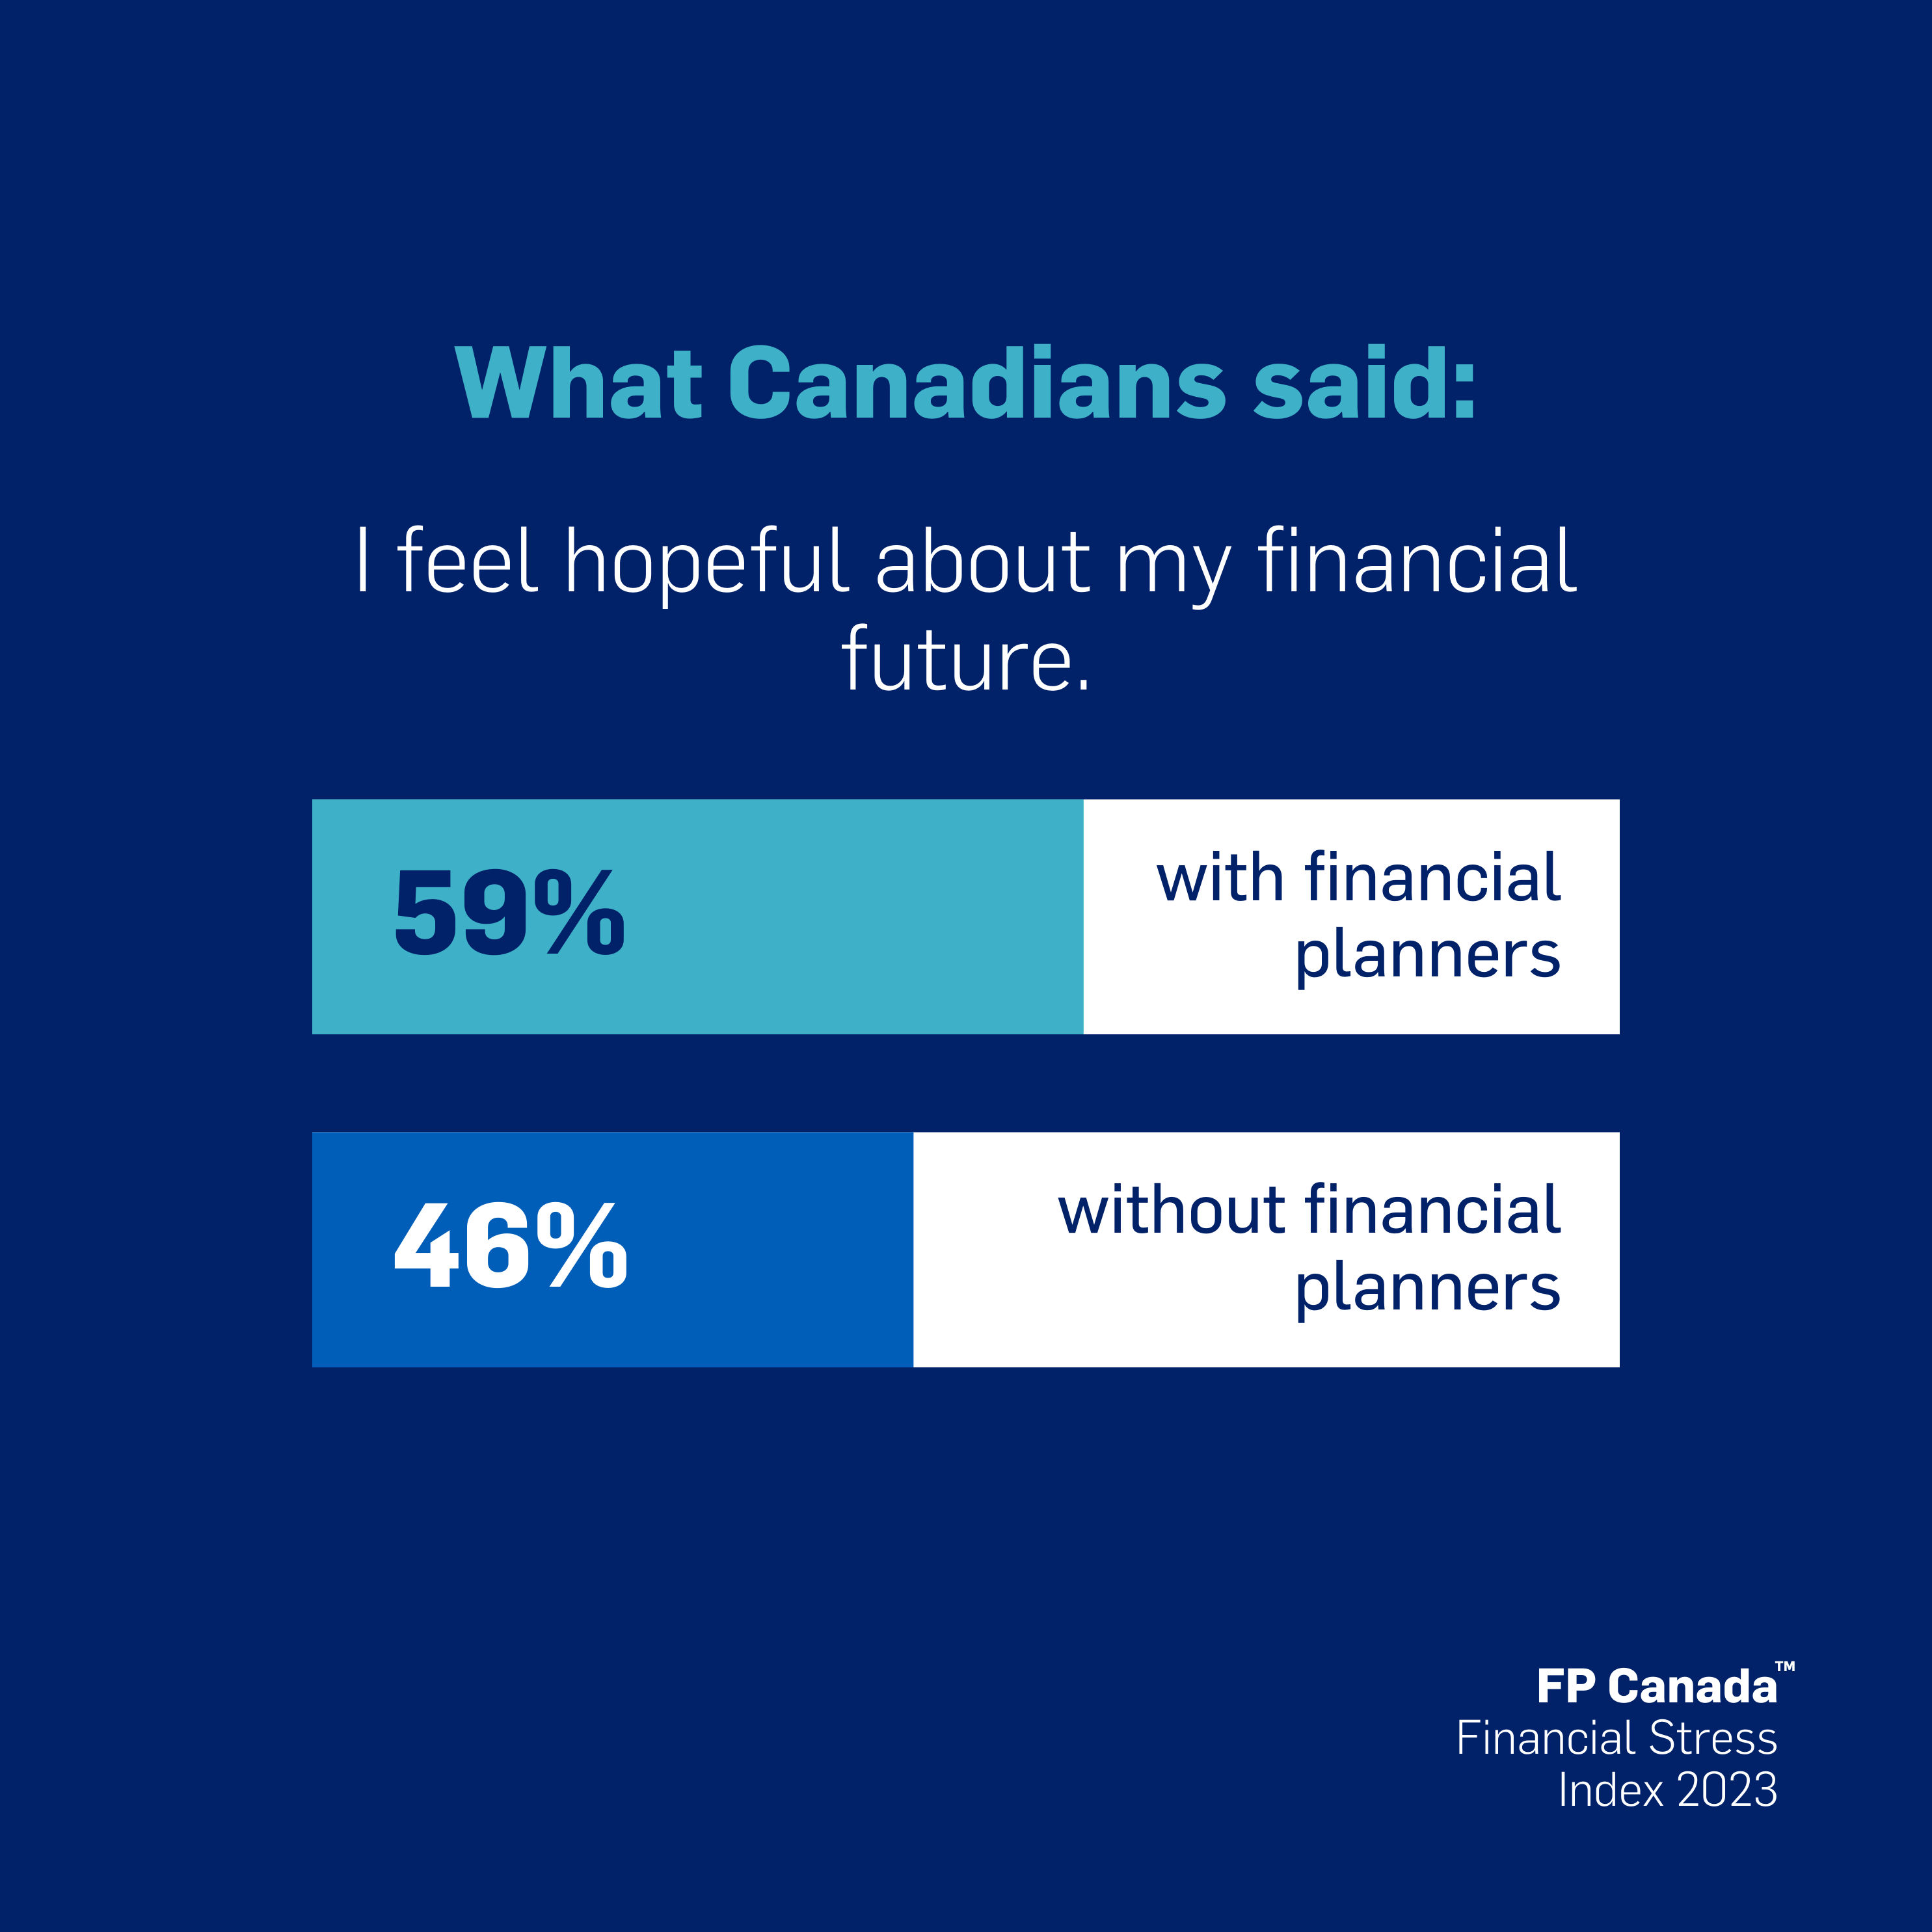 What Canadians said: I feel hopeful about my financial future.  59% agreed - with financial planners.